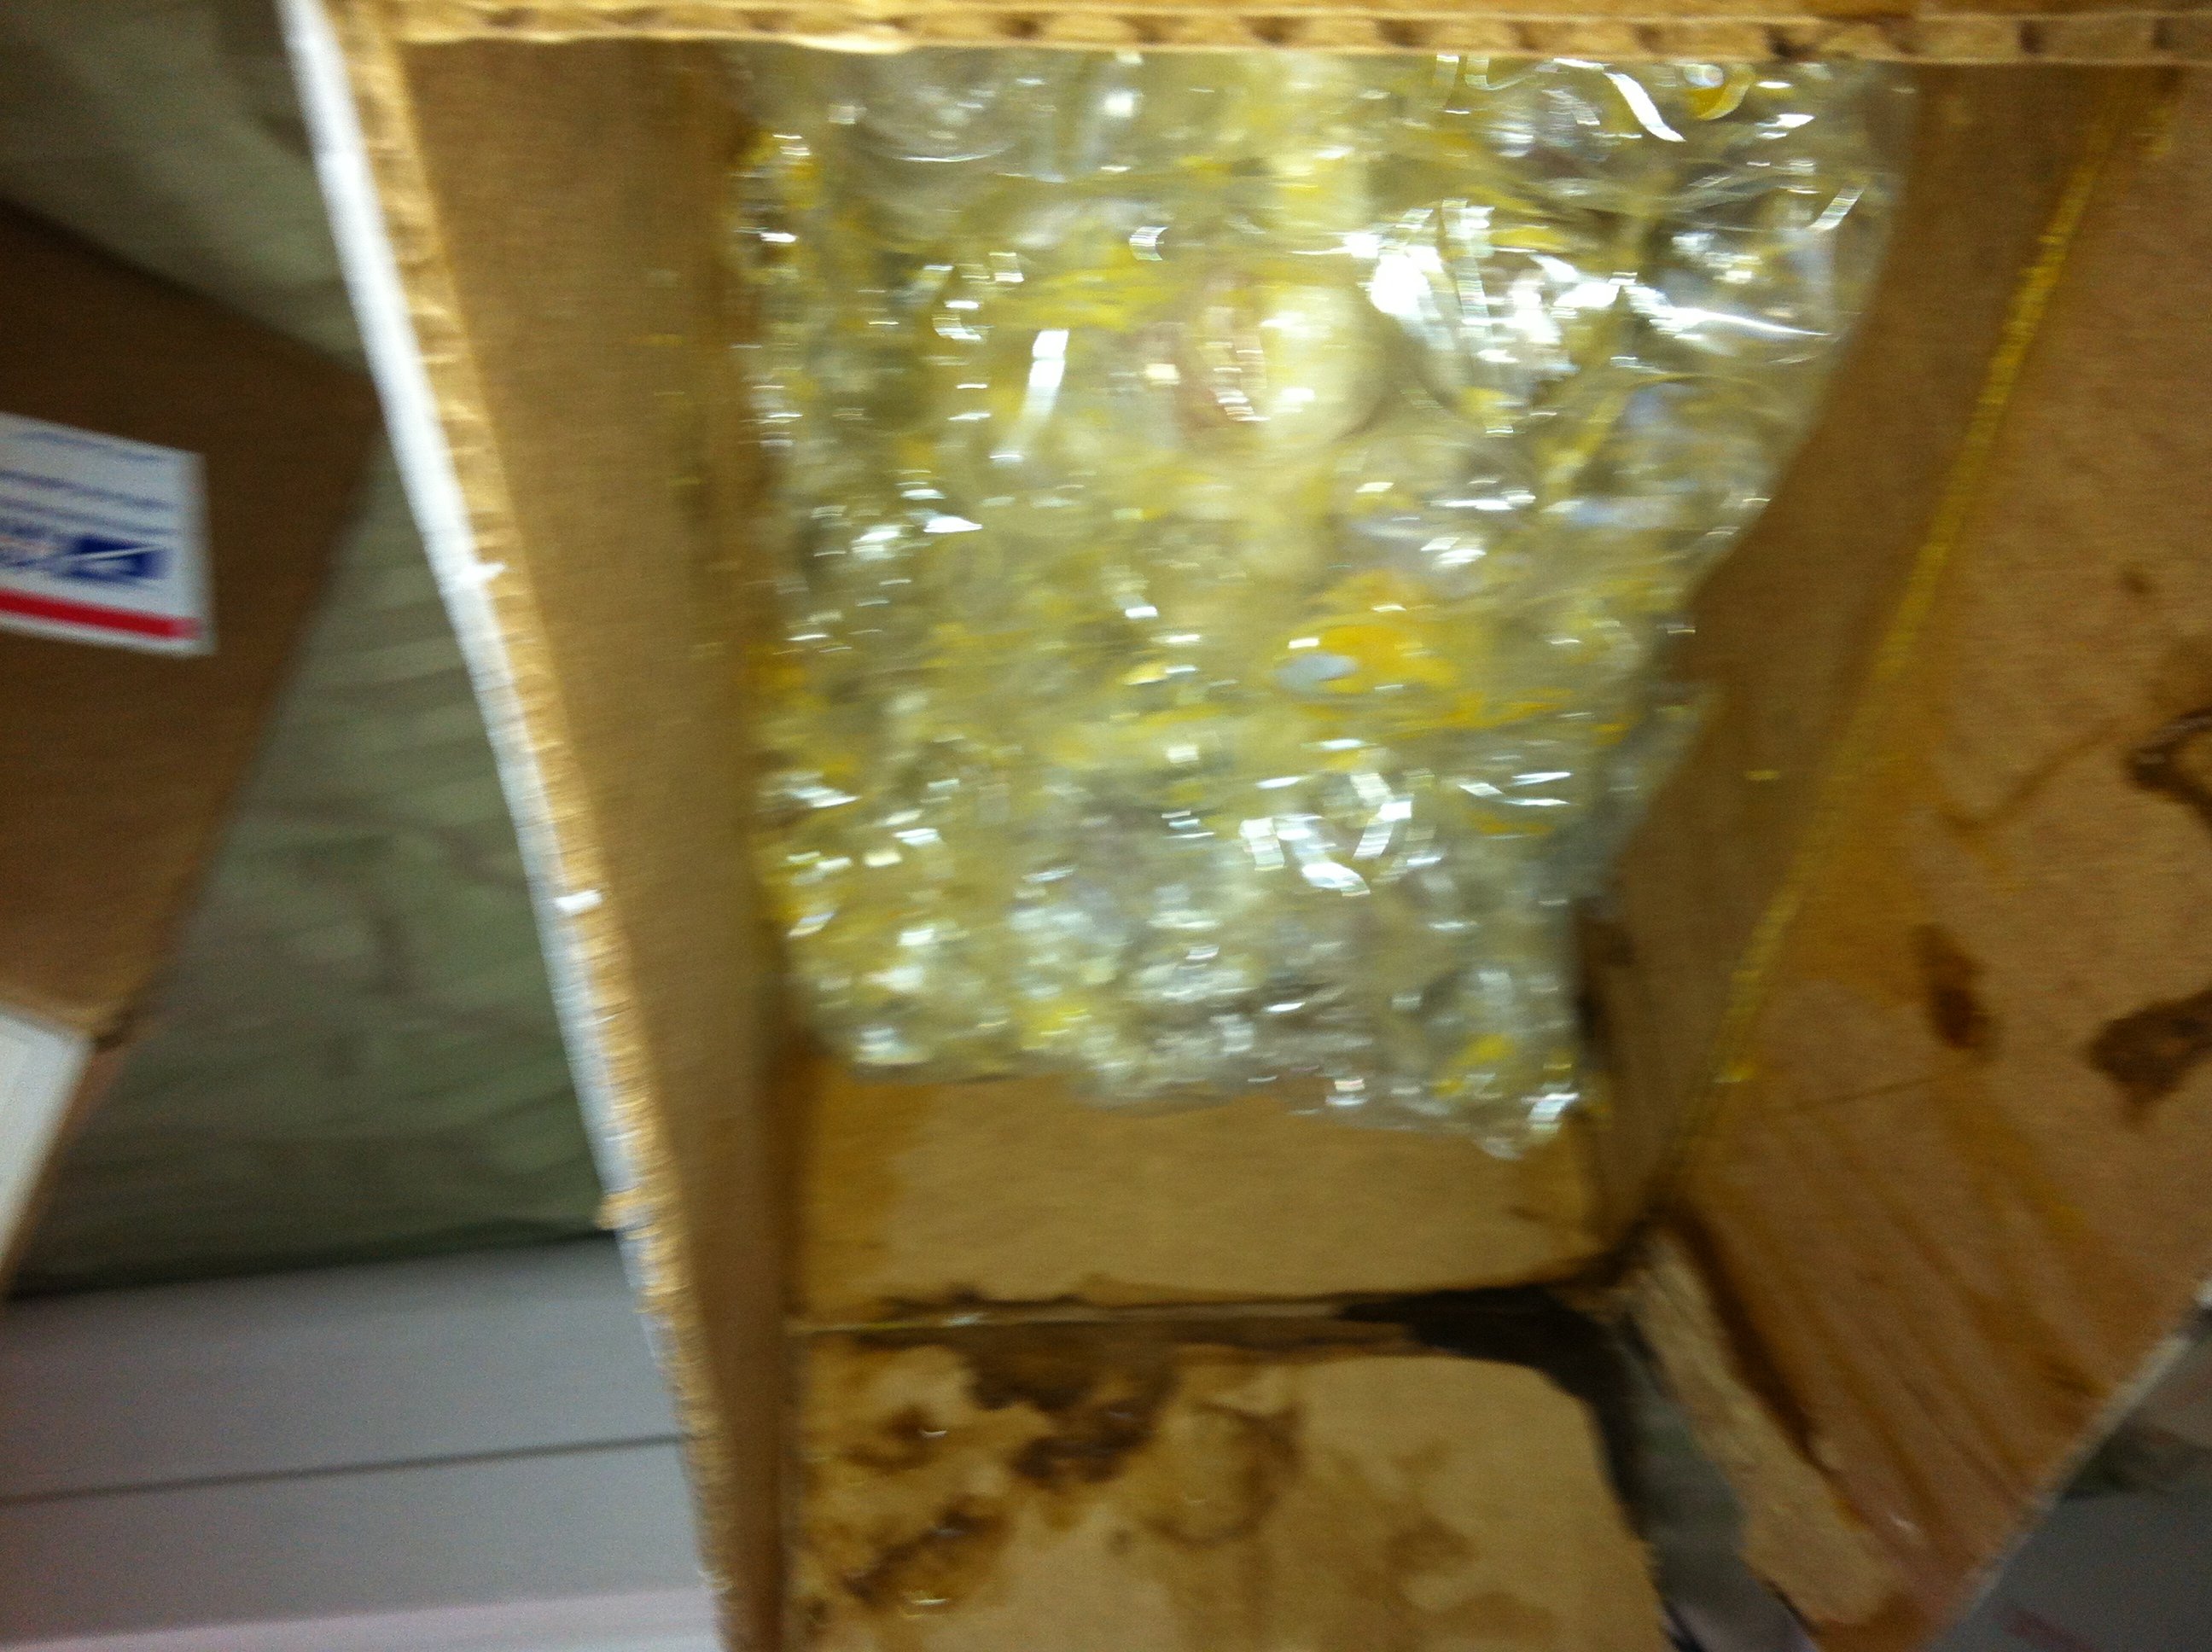 Box with too much extra space left, so the eggs were bounced around inside.